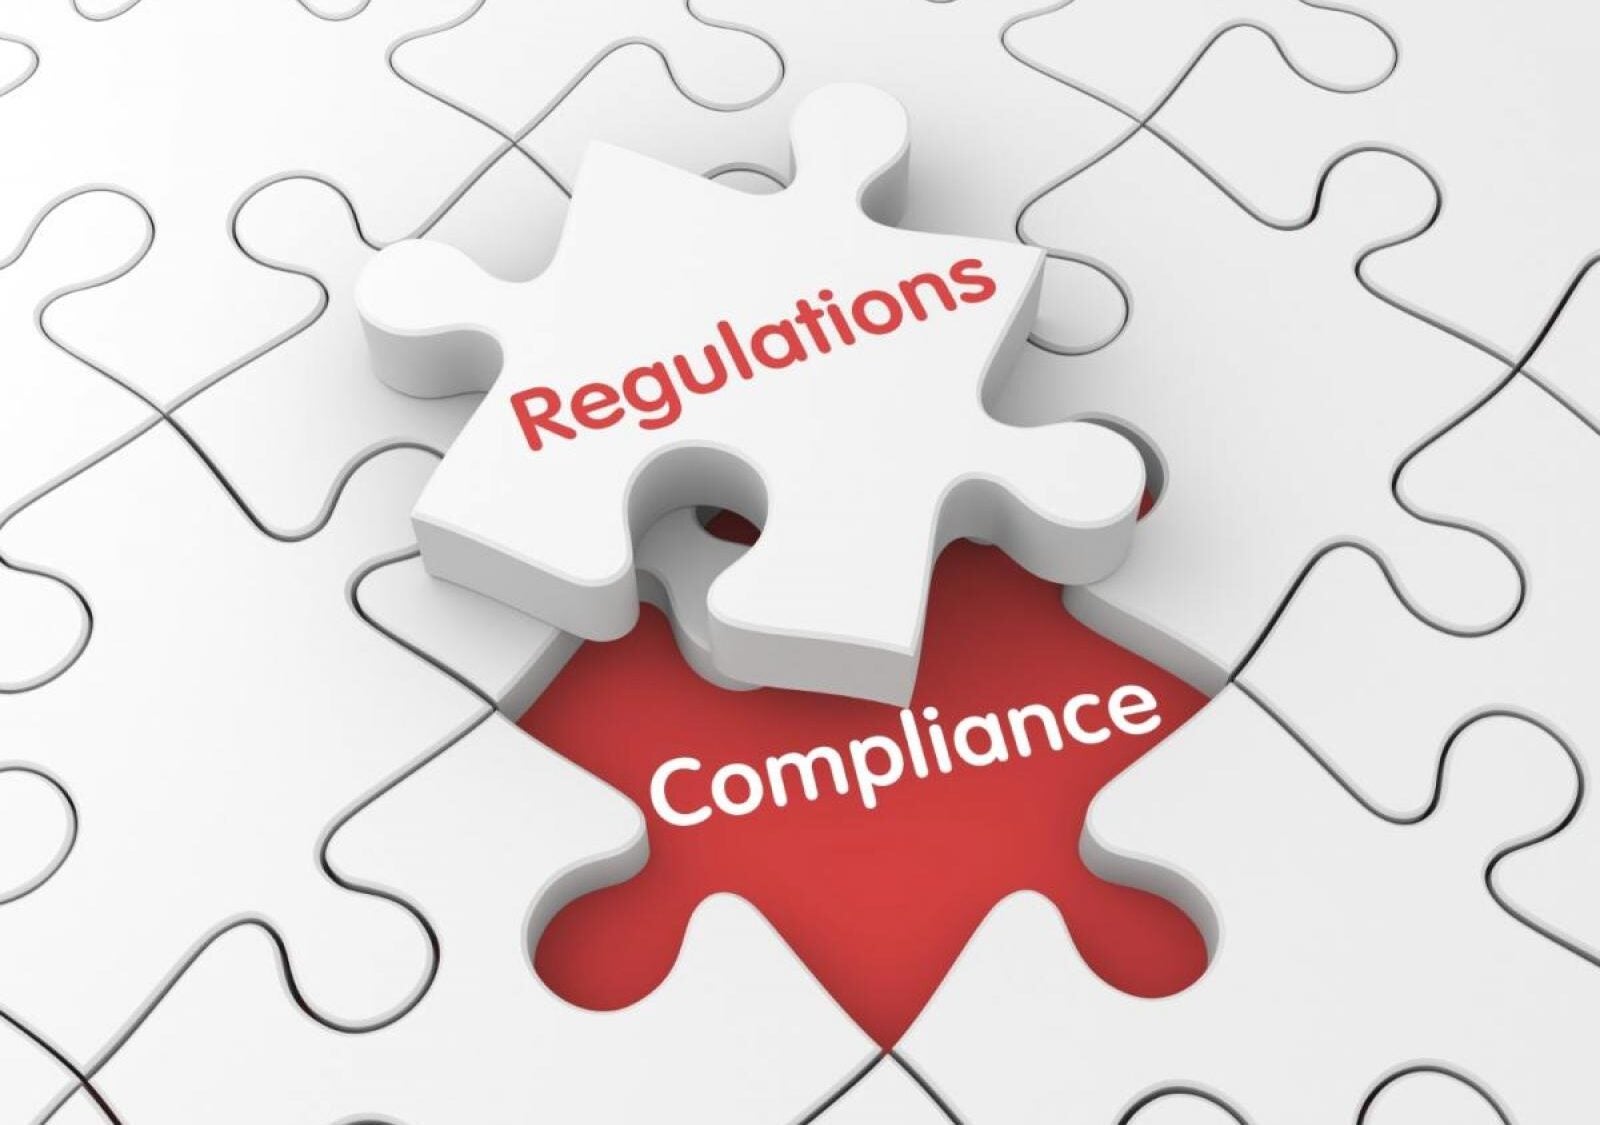 Compliance and Regulation words written on white puzzle piece